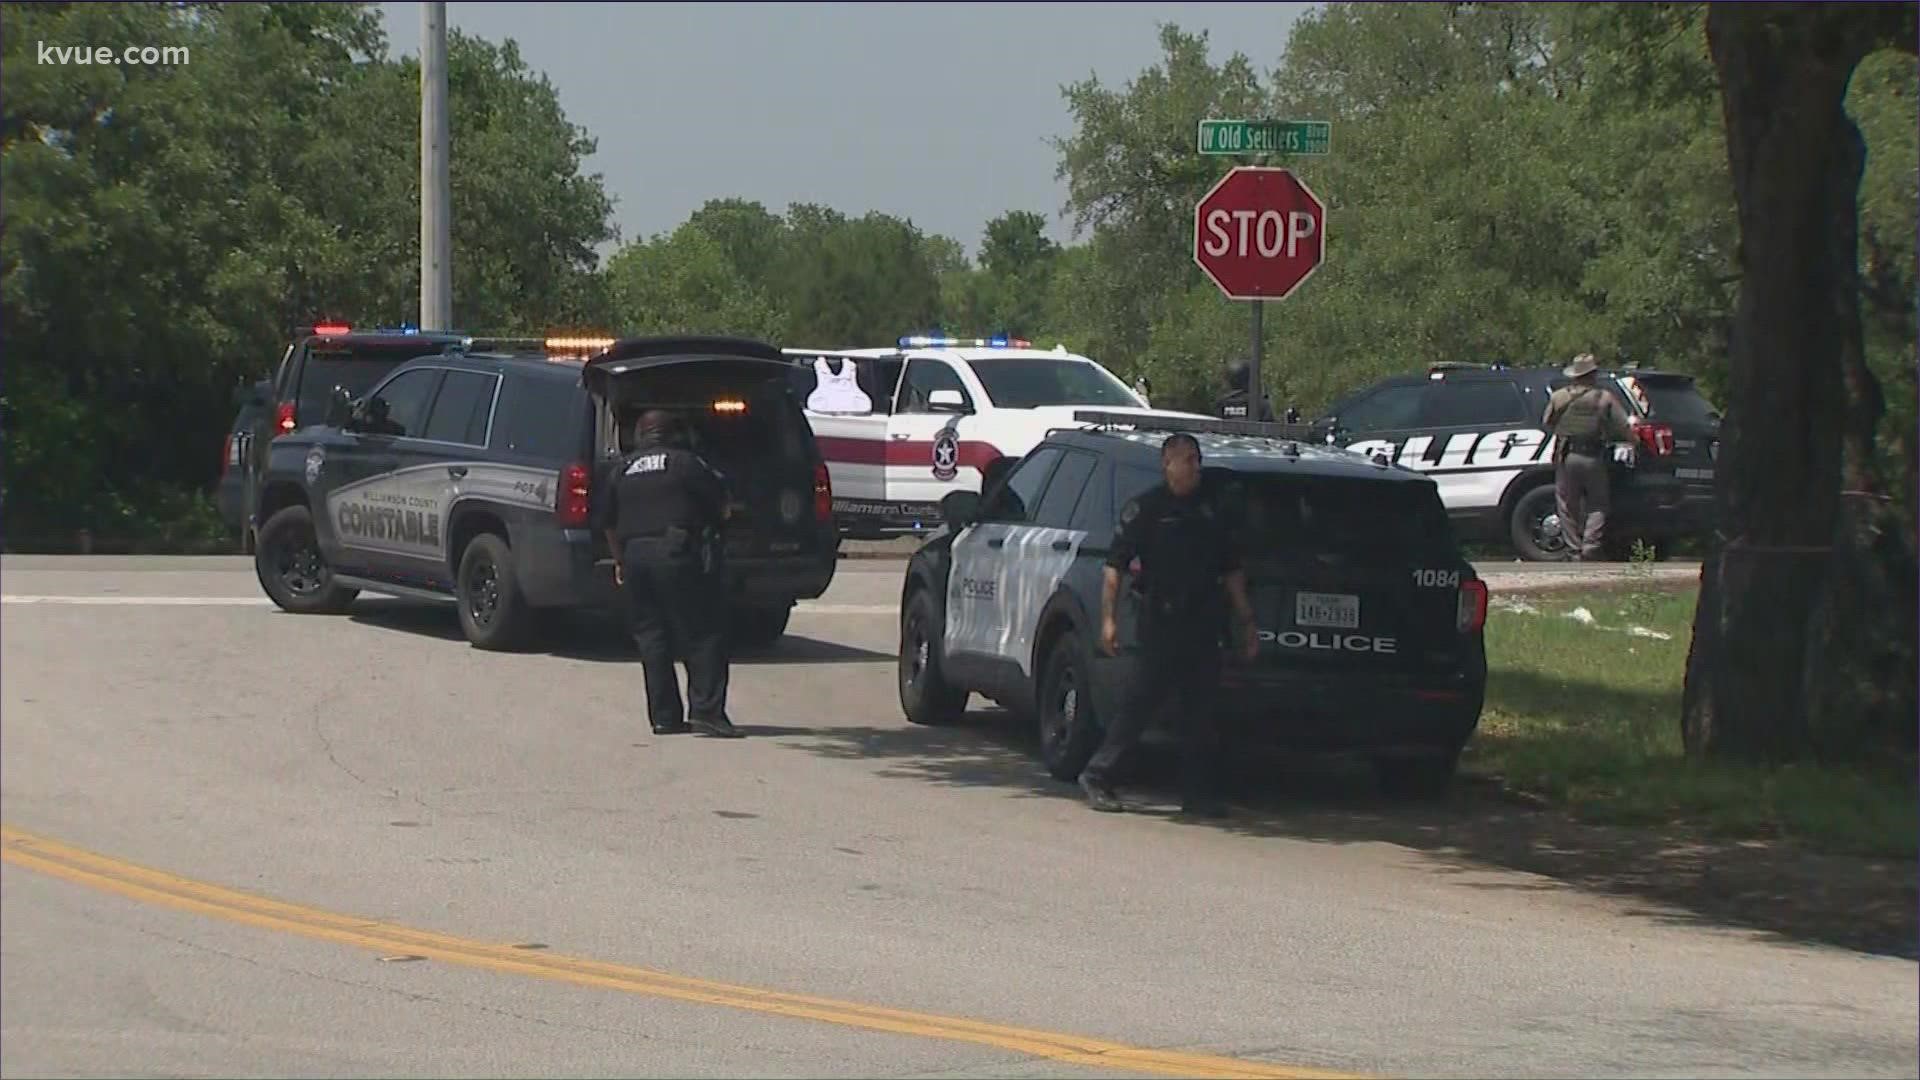 The 31-year-old died following a shootout with authorities in Round Rock.